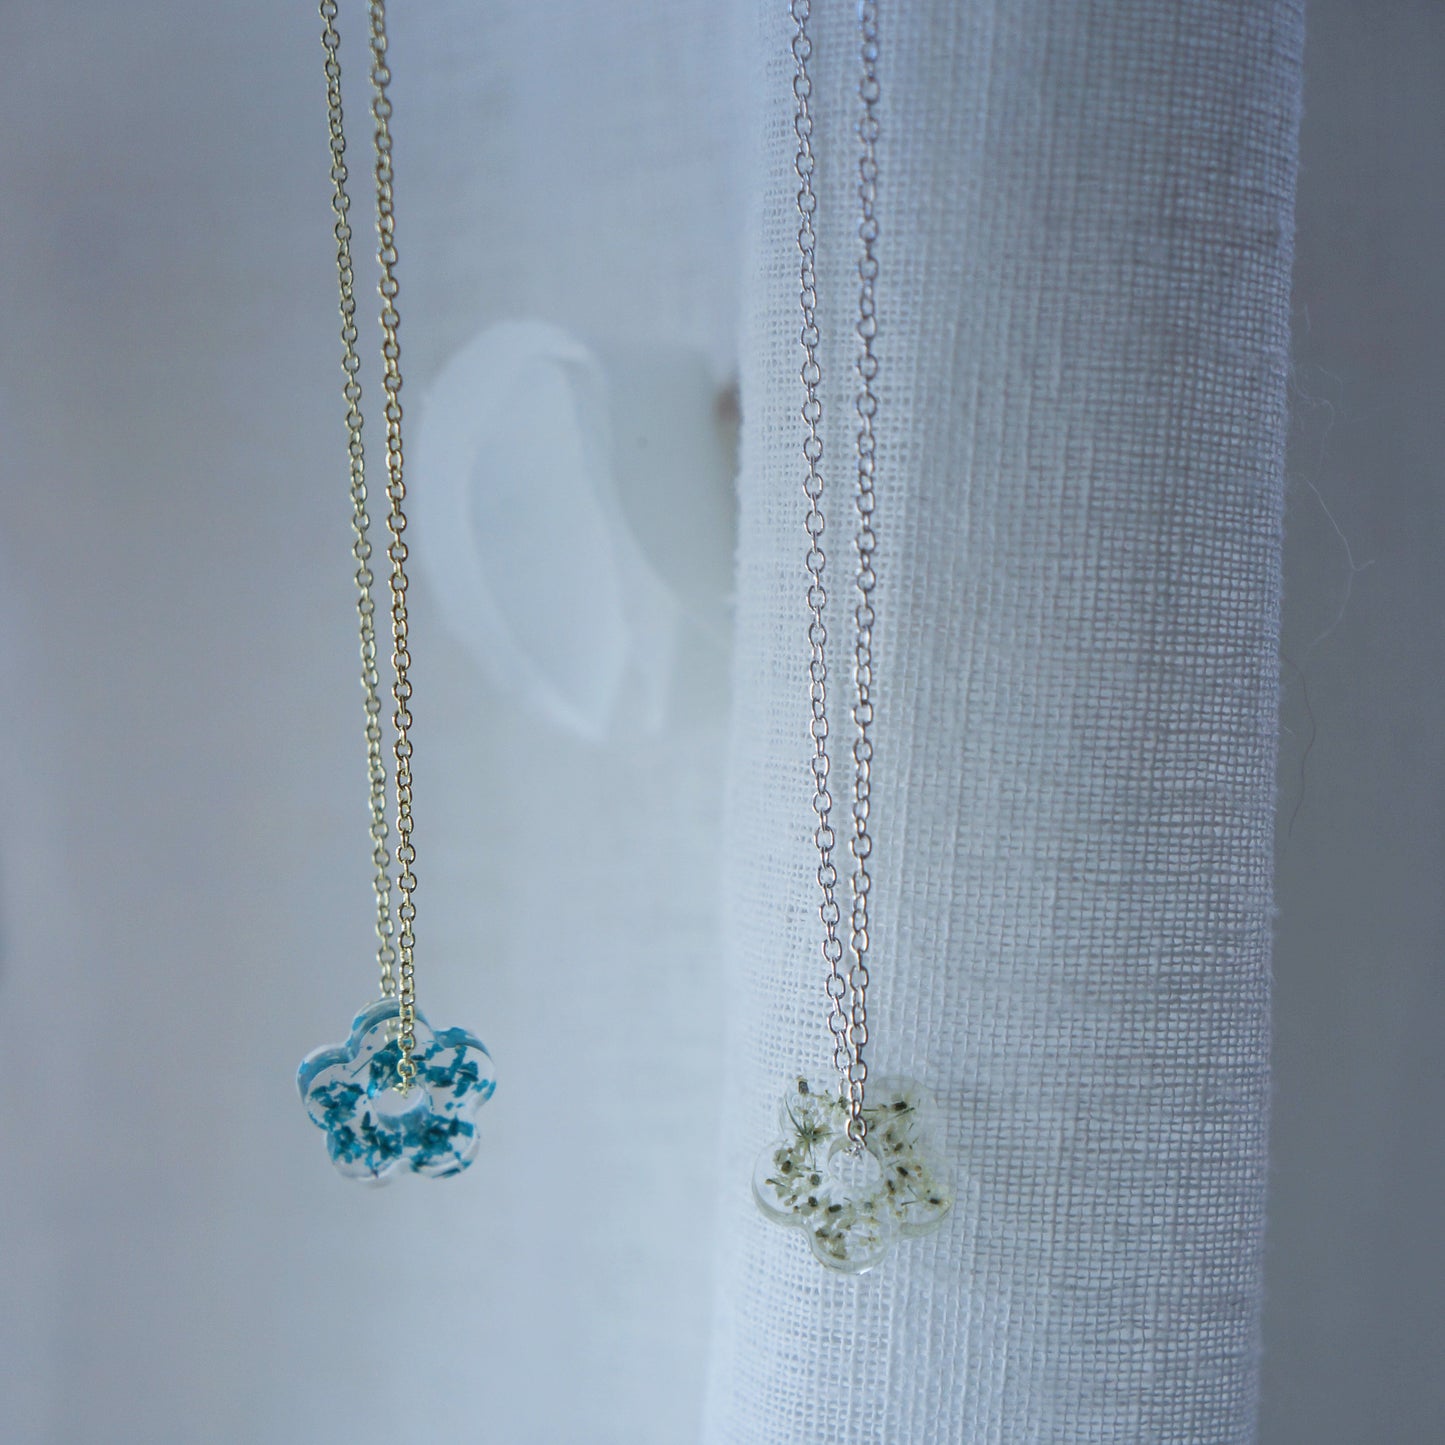 Dainty flower shaped necklace